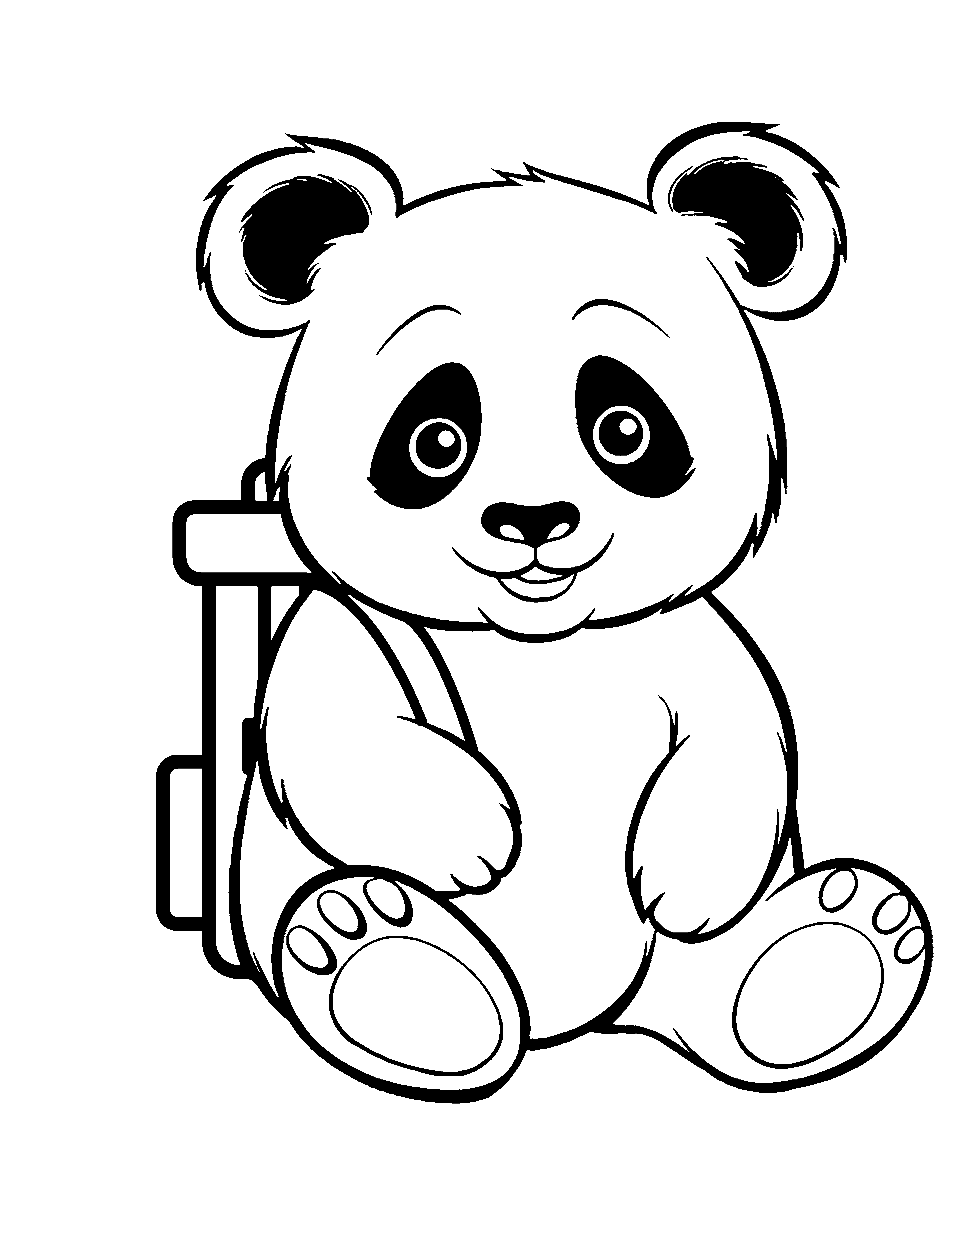 Panda with a Backpack Coloring Page - A wandering panda wearing a small backpack, ready for an adventure.